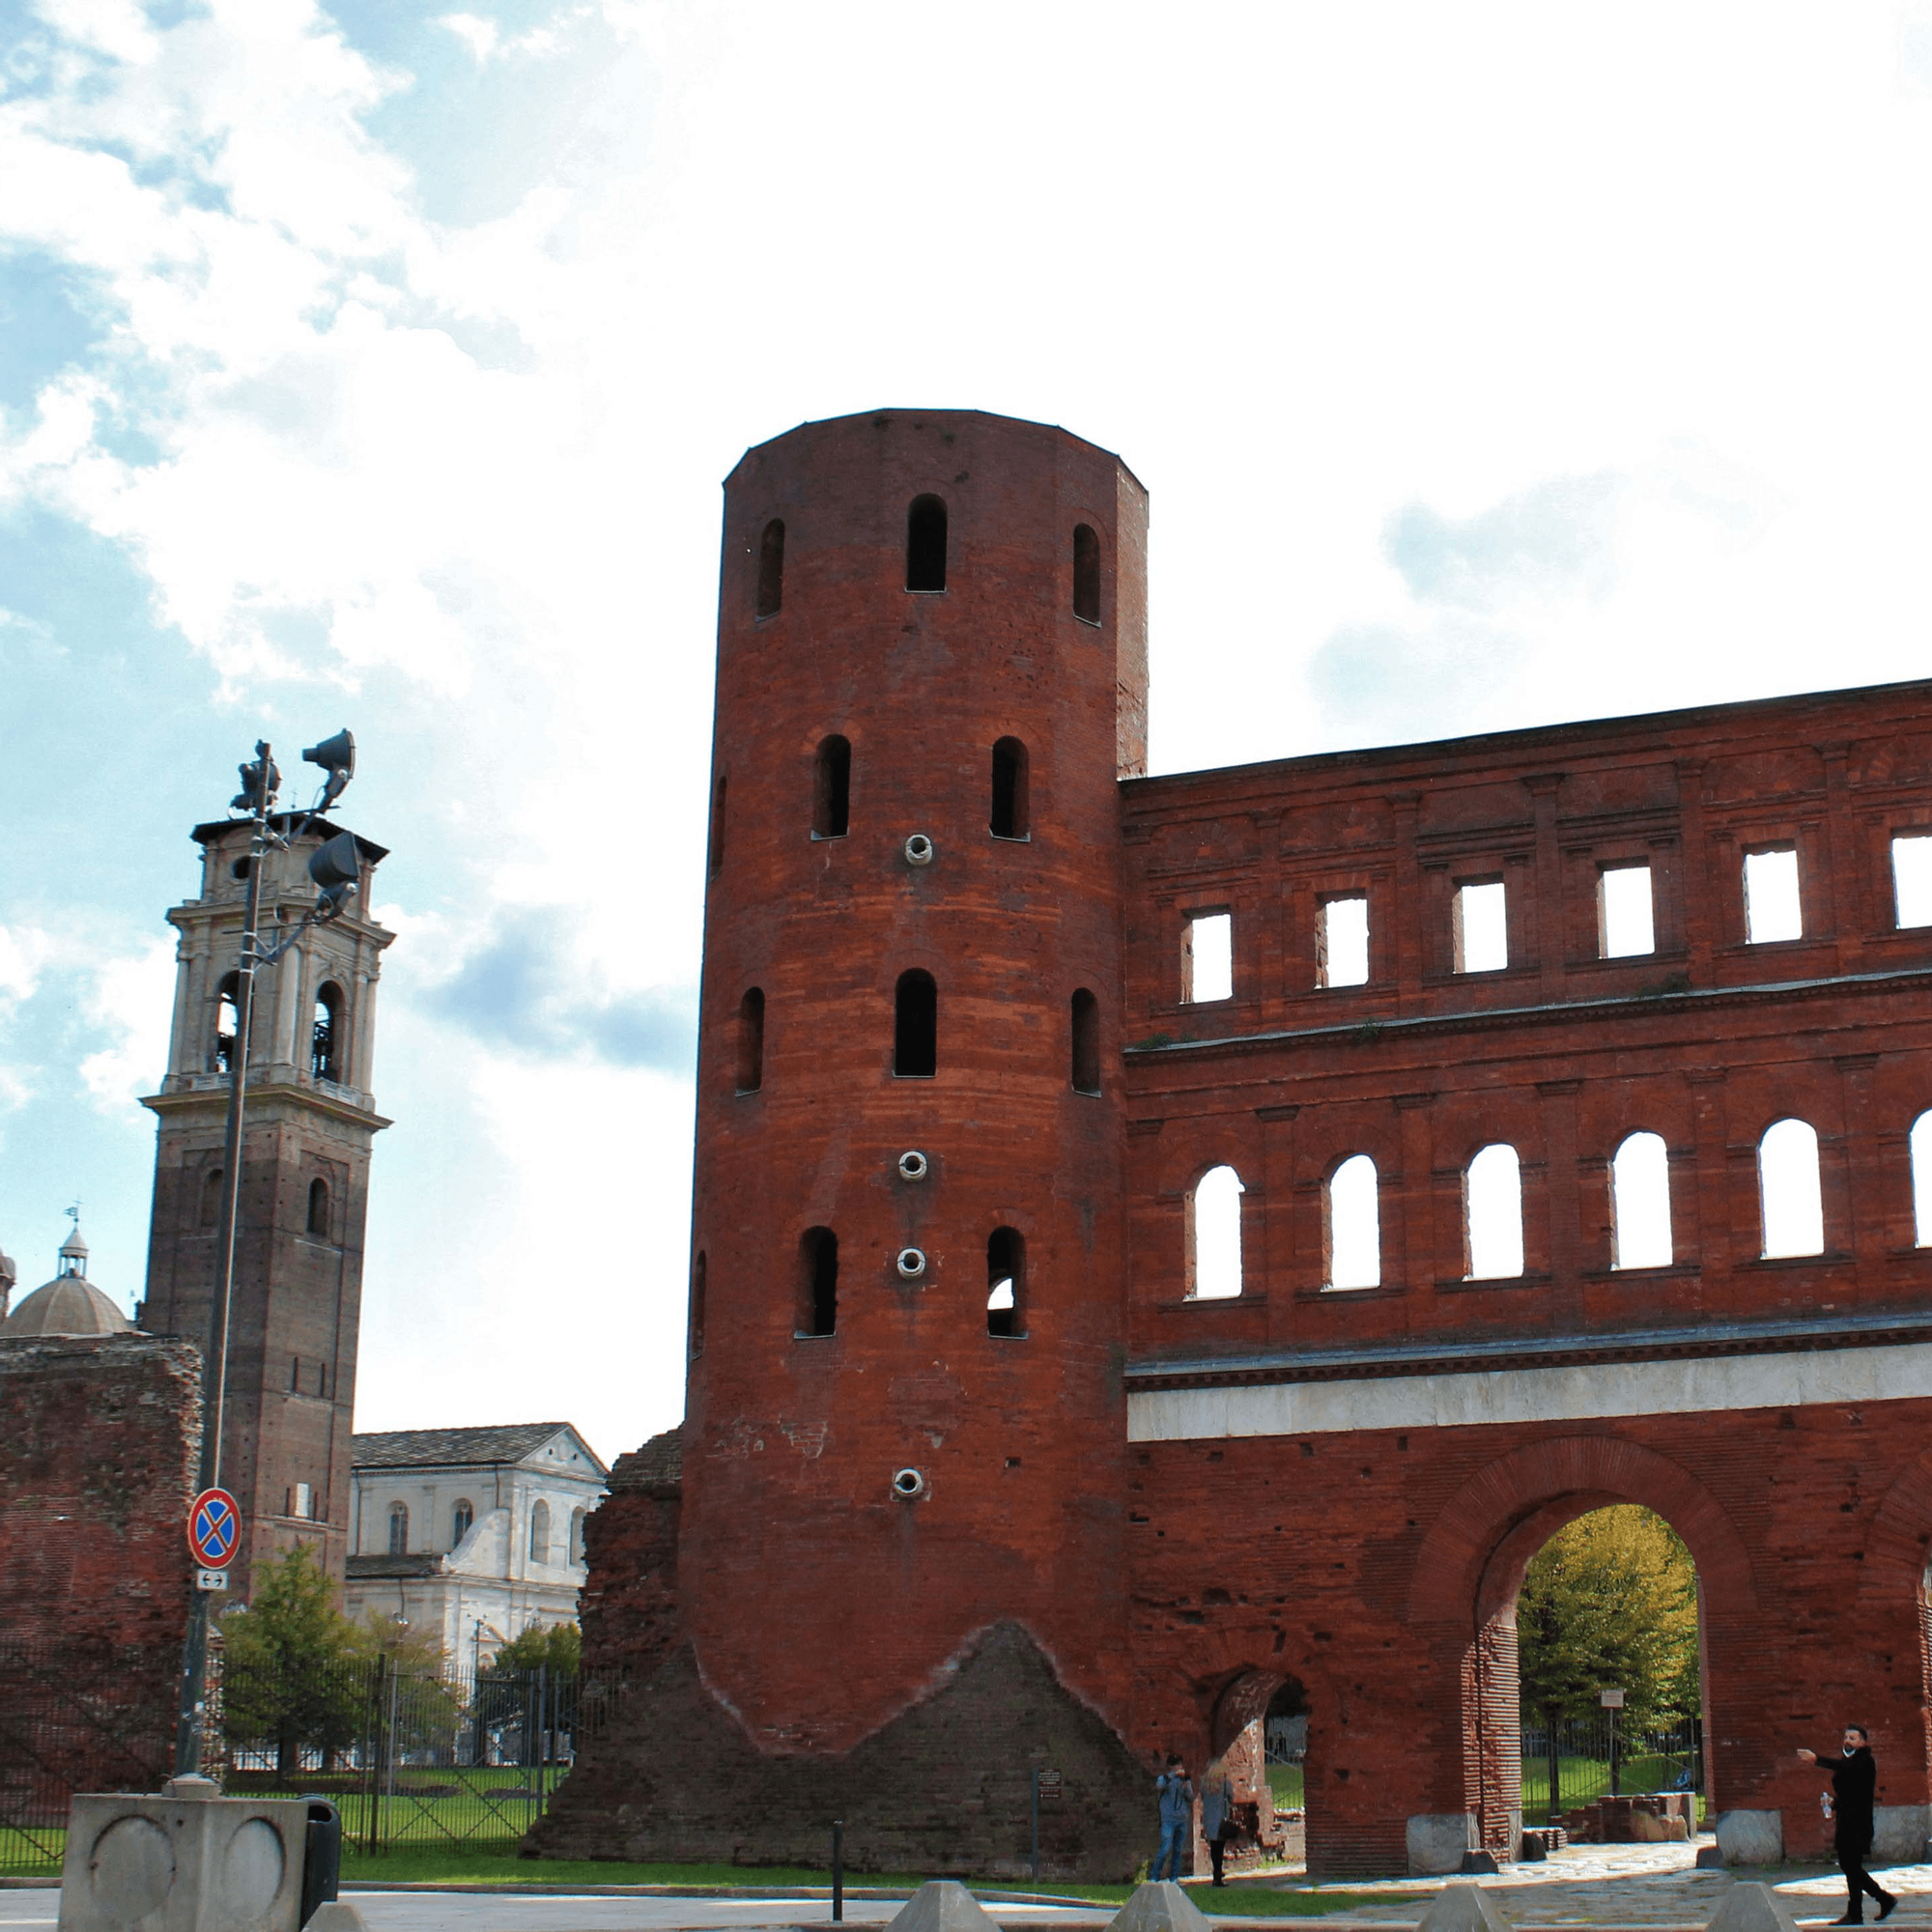 Things to see in Turin, Porte Palatine